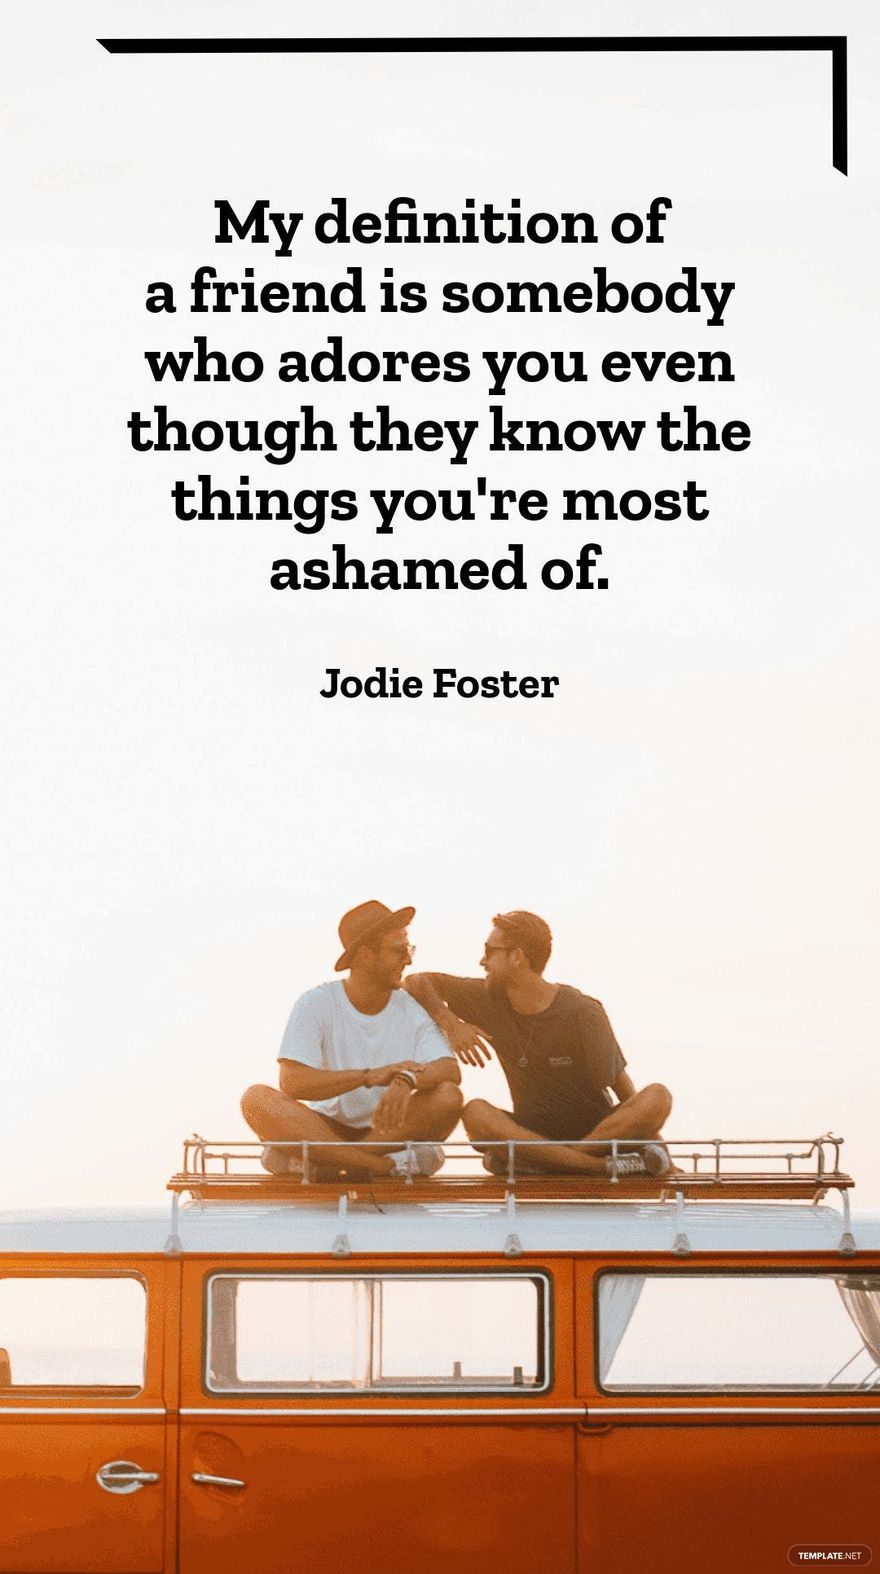 Jodie Foster - My definition of a friend is somebody who adores you even though they know the things you're most ashamed of.